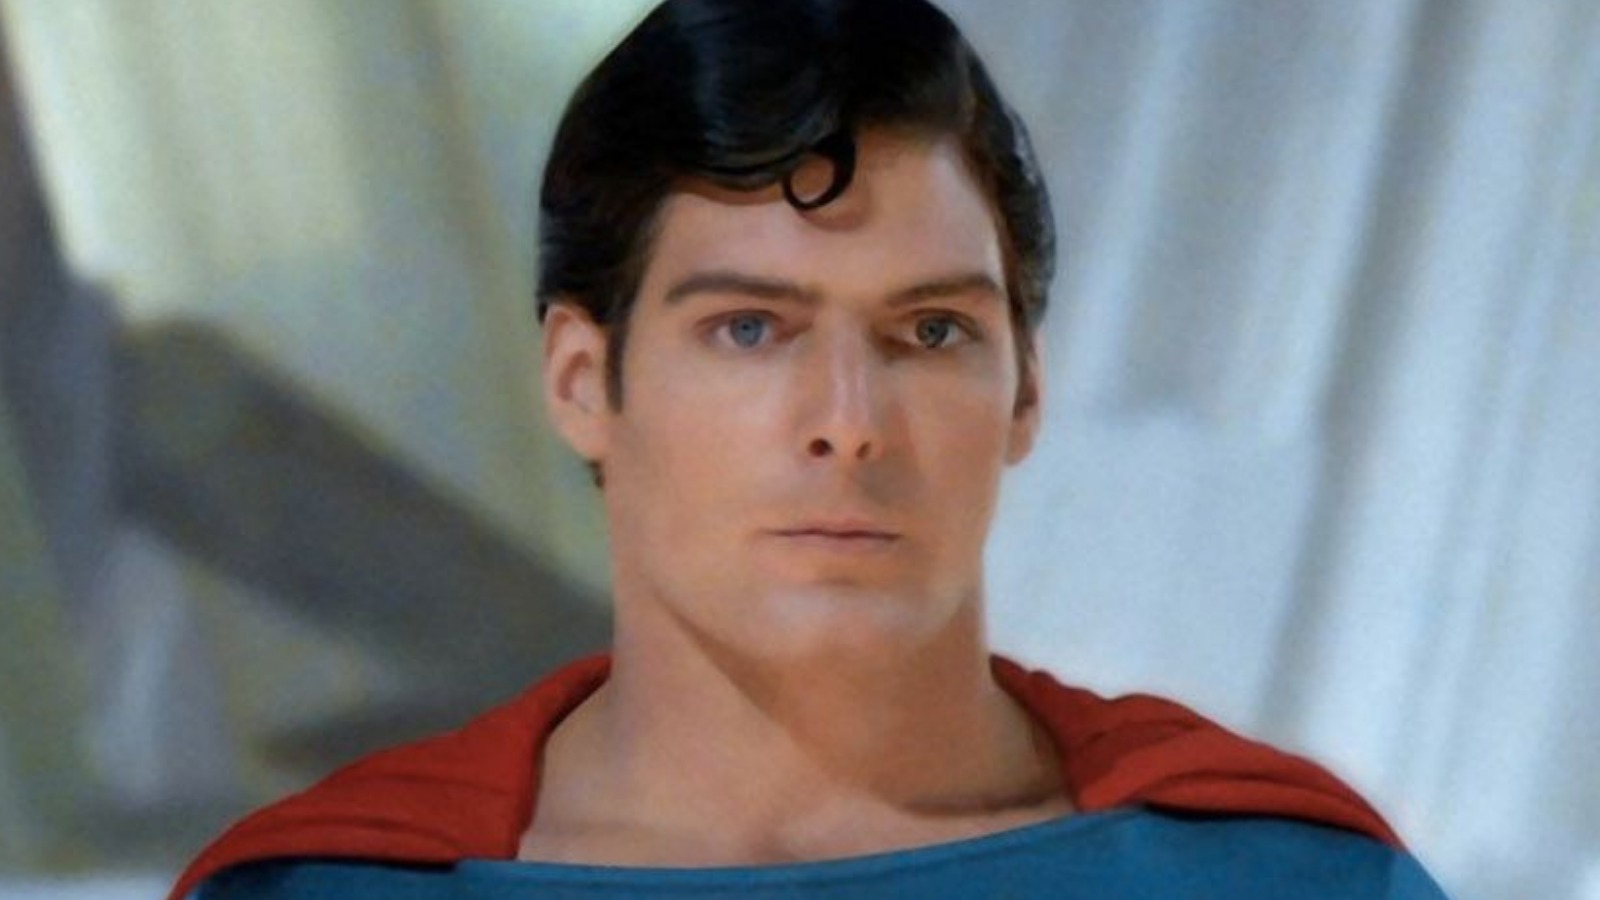 Every Superman Movie Ranked From Worst To Best